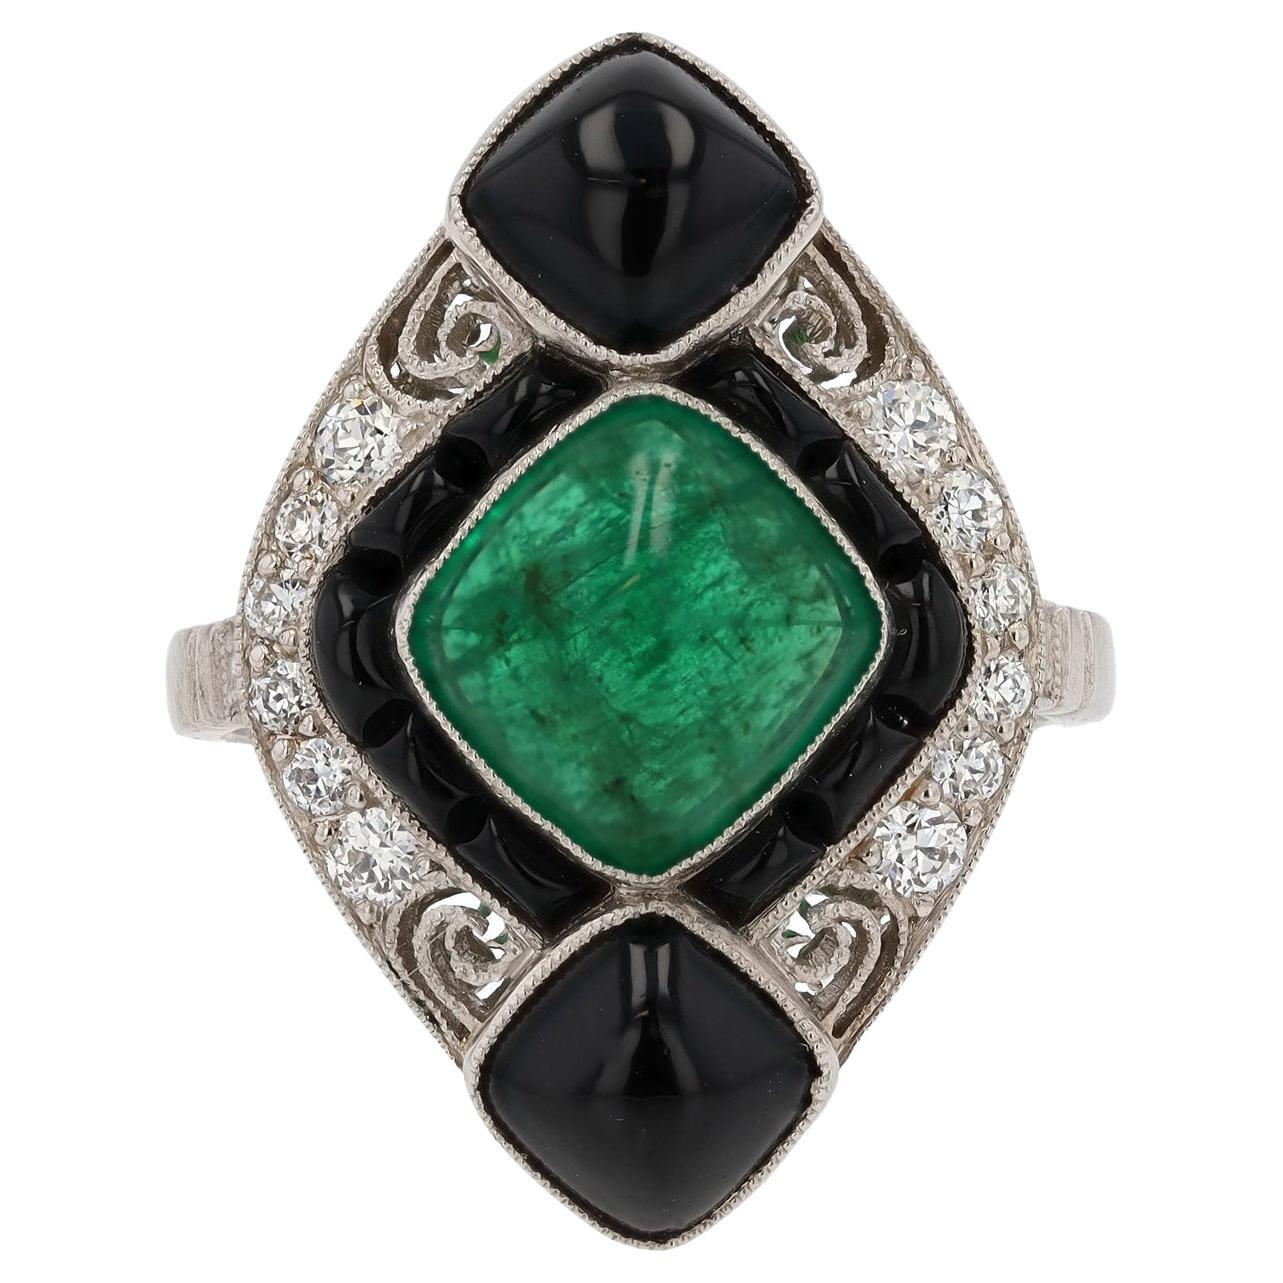 Green Onyx Stone Jewelry | Green Onyx Rings, Earrings and other – Moon Magic